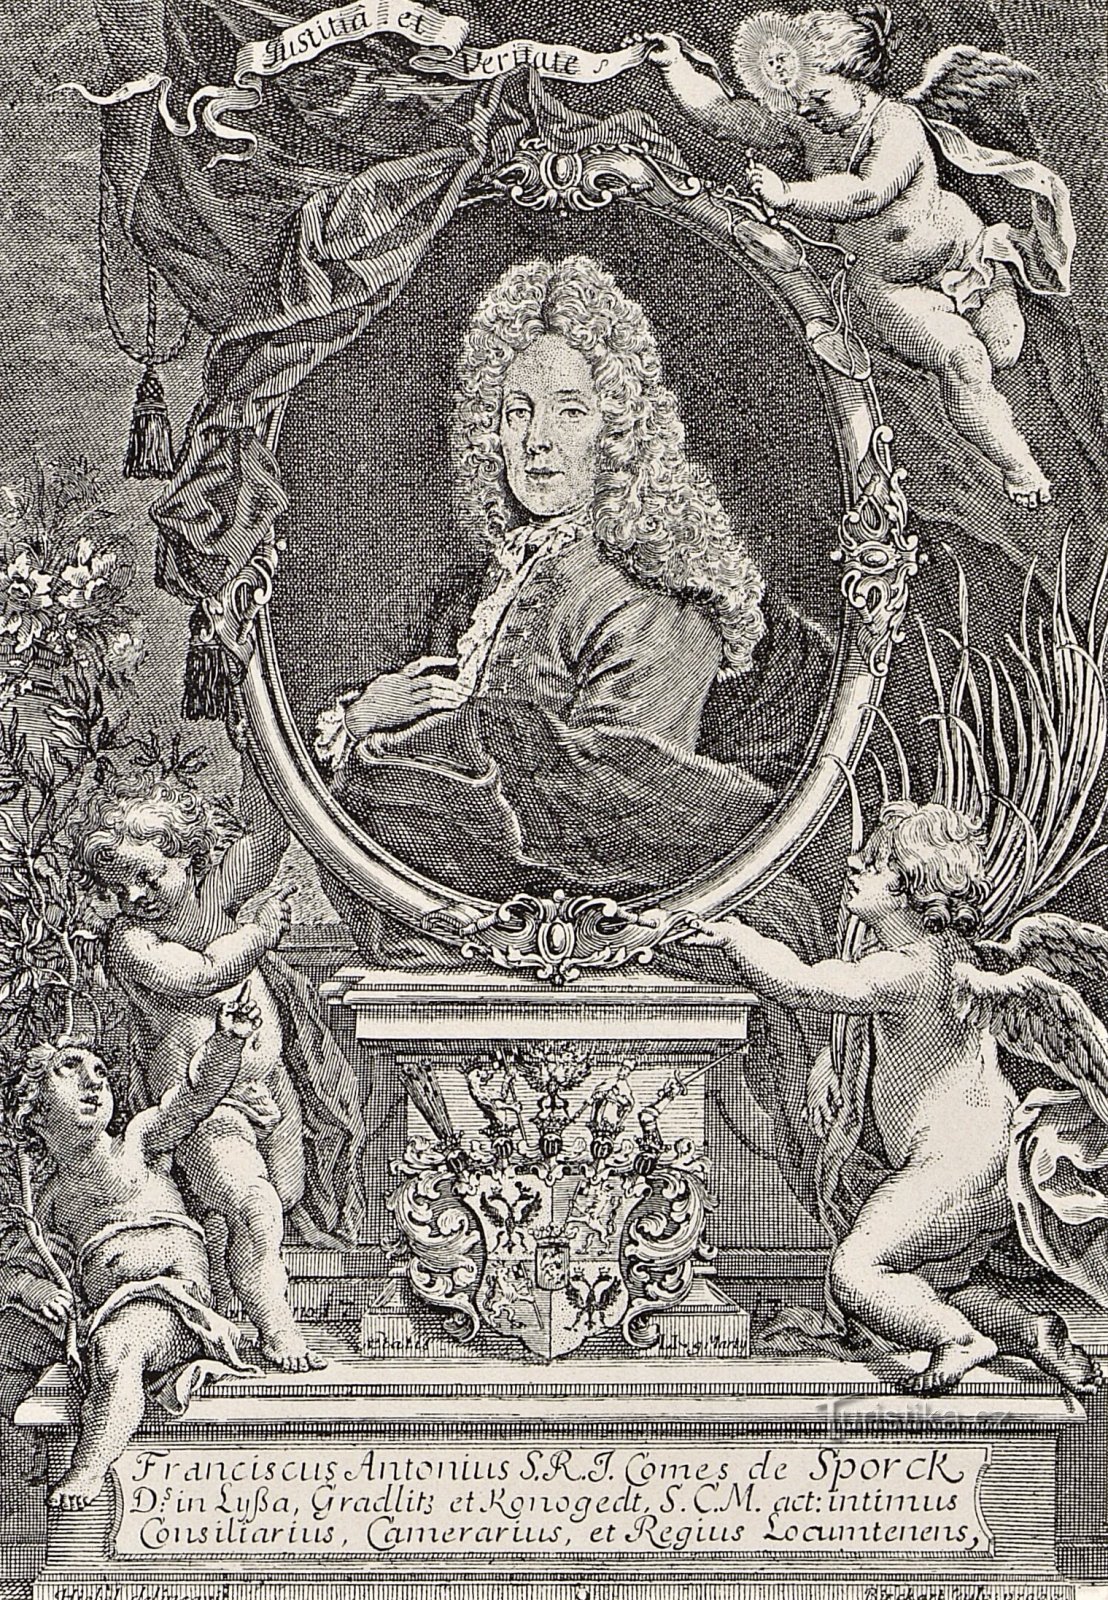 Count František A. Spork on an engraving from 1713